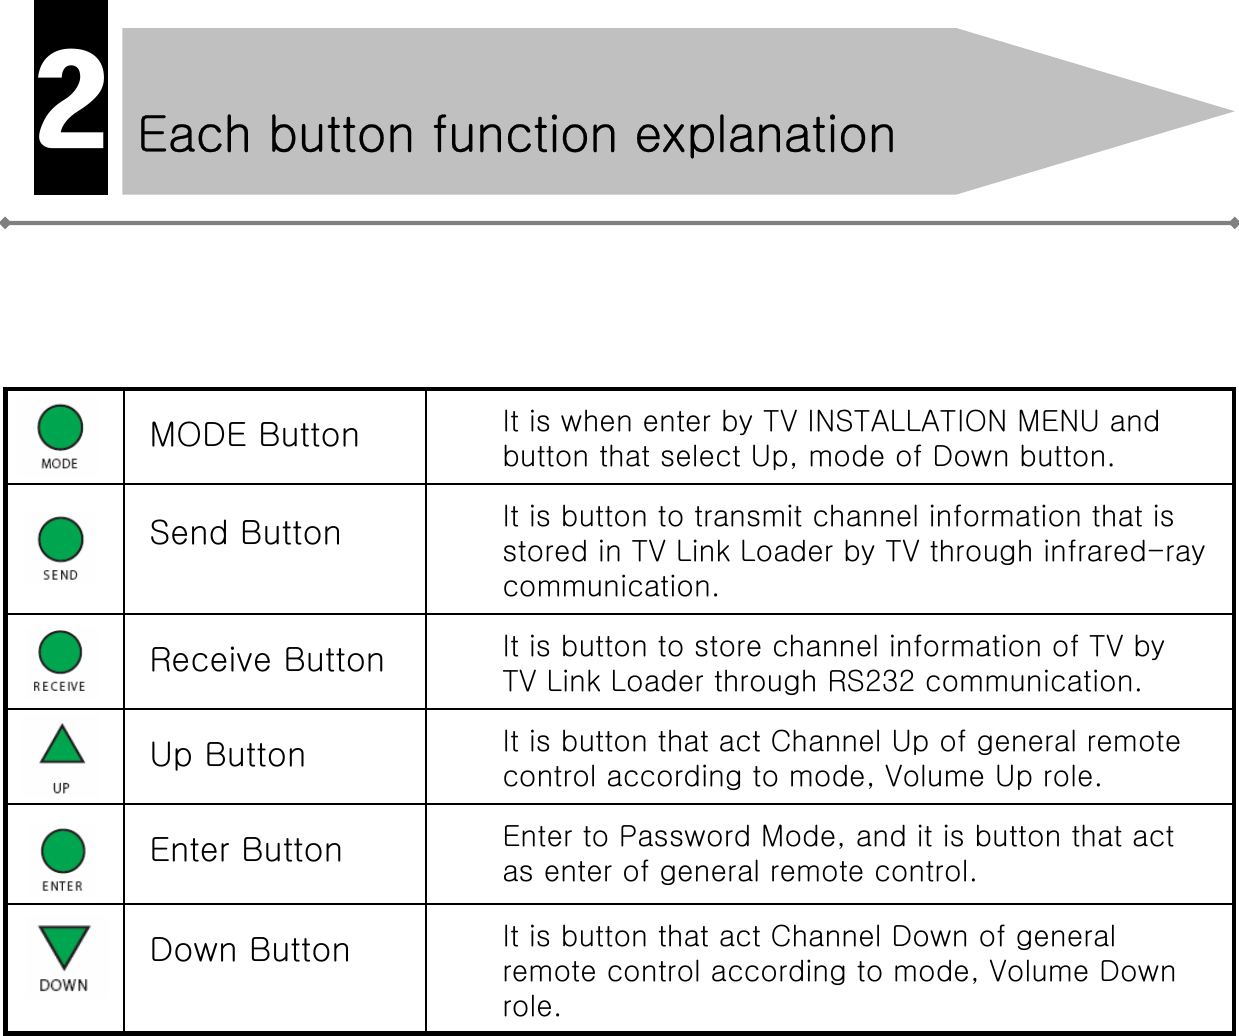 Each button function explanation2It is button that act Channel Down of general remote control according to mode, Volume Down role.Down ButtonEnter to Password Mode, and it is button that act as enter of general remote control.Enter ButtonIt is button that act Channel Up of general remote control according to mode, Volume Up role.Up ButtonIt is button to store channel information of TV by TV Link Loader through RS232 communication.Receive ButtonIt is button to transmit channel information that is stored in TV Link Loader by TV through infrared-ray communication.Send ButtonIt is when enter by TV INSTALLATION MENU and button that select Up, mode of Down button.MODE Button